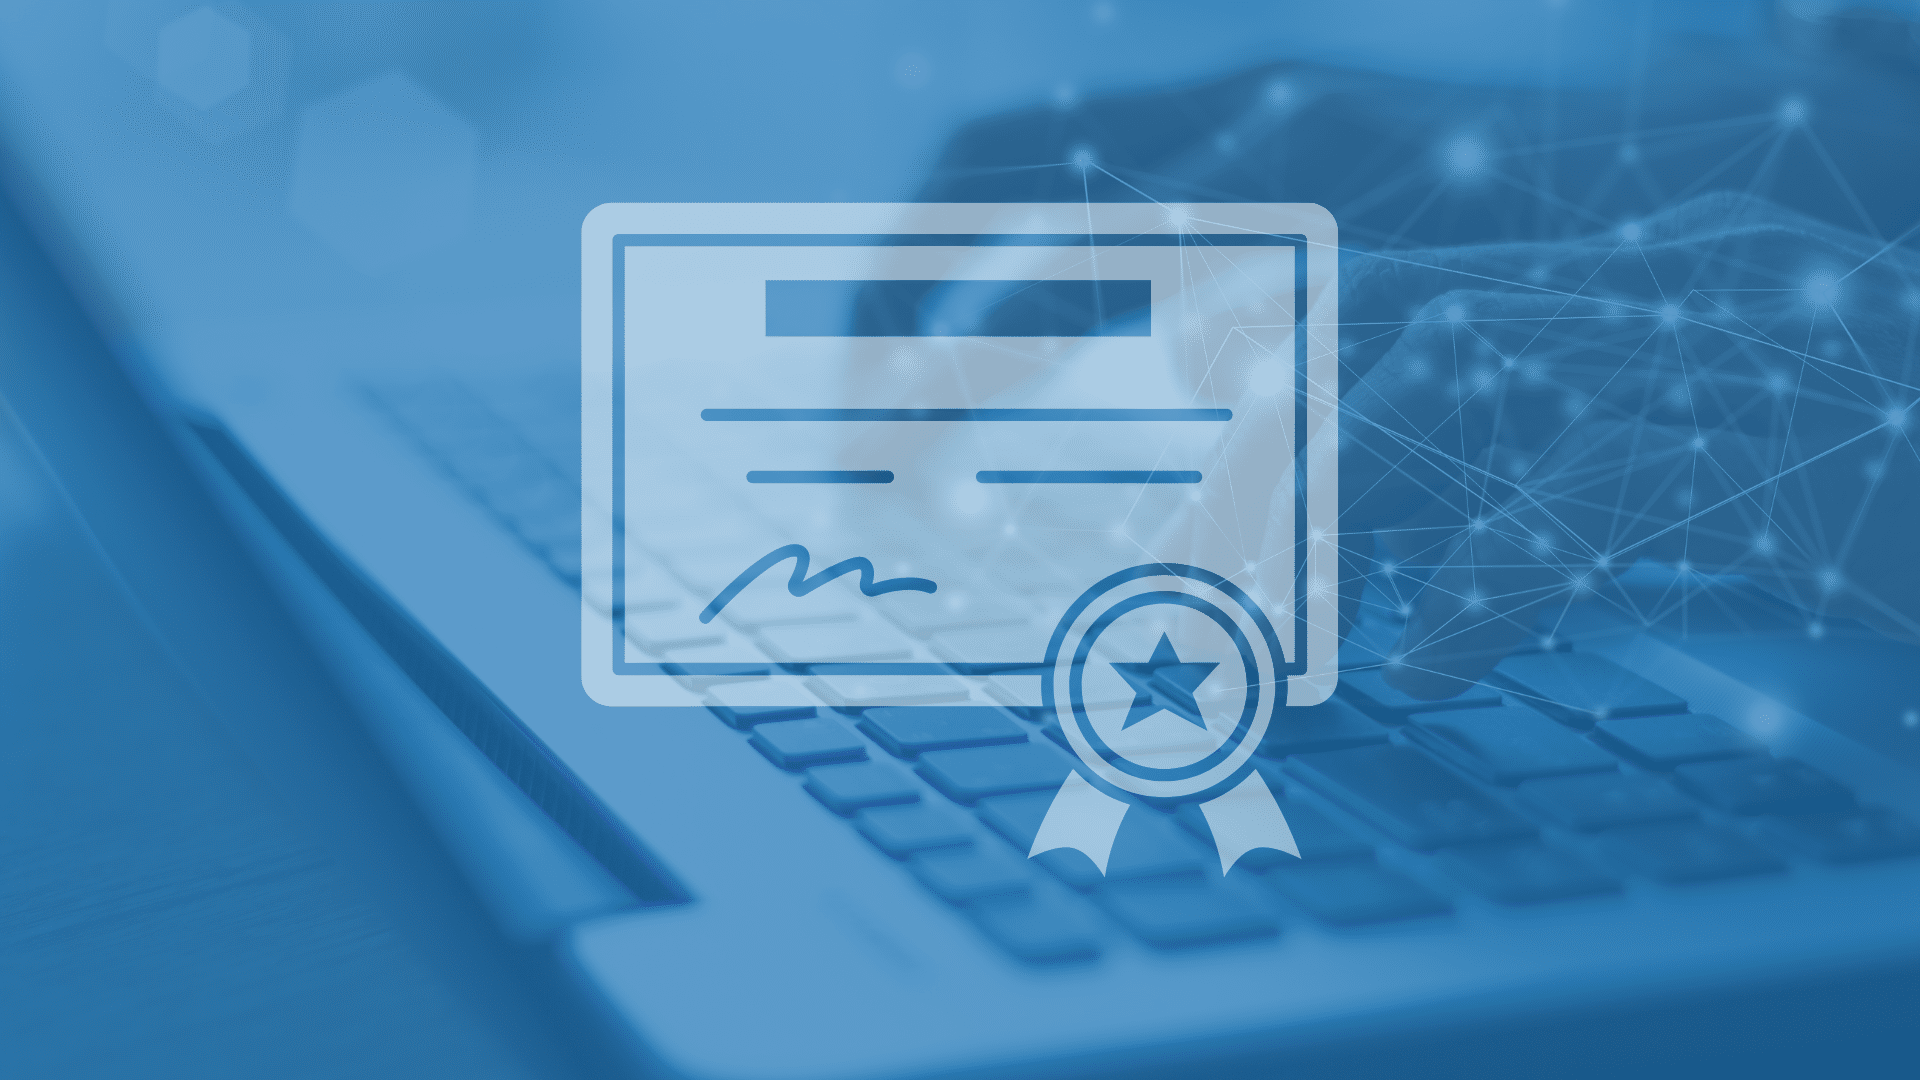 Digital Certificates: The Key to Secure Online Transactions